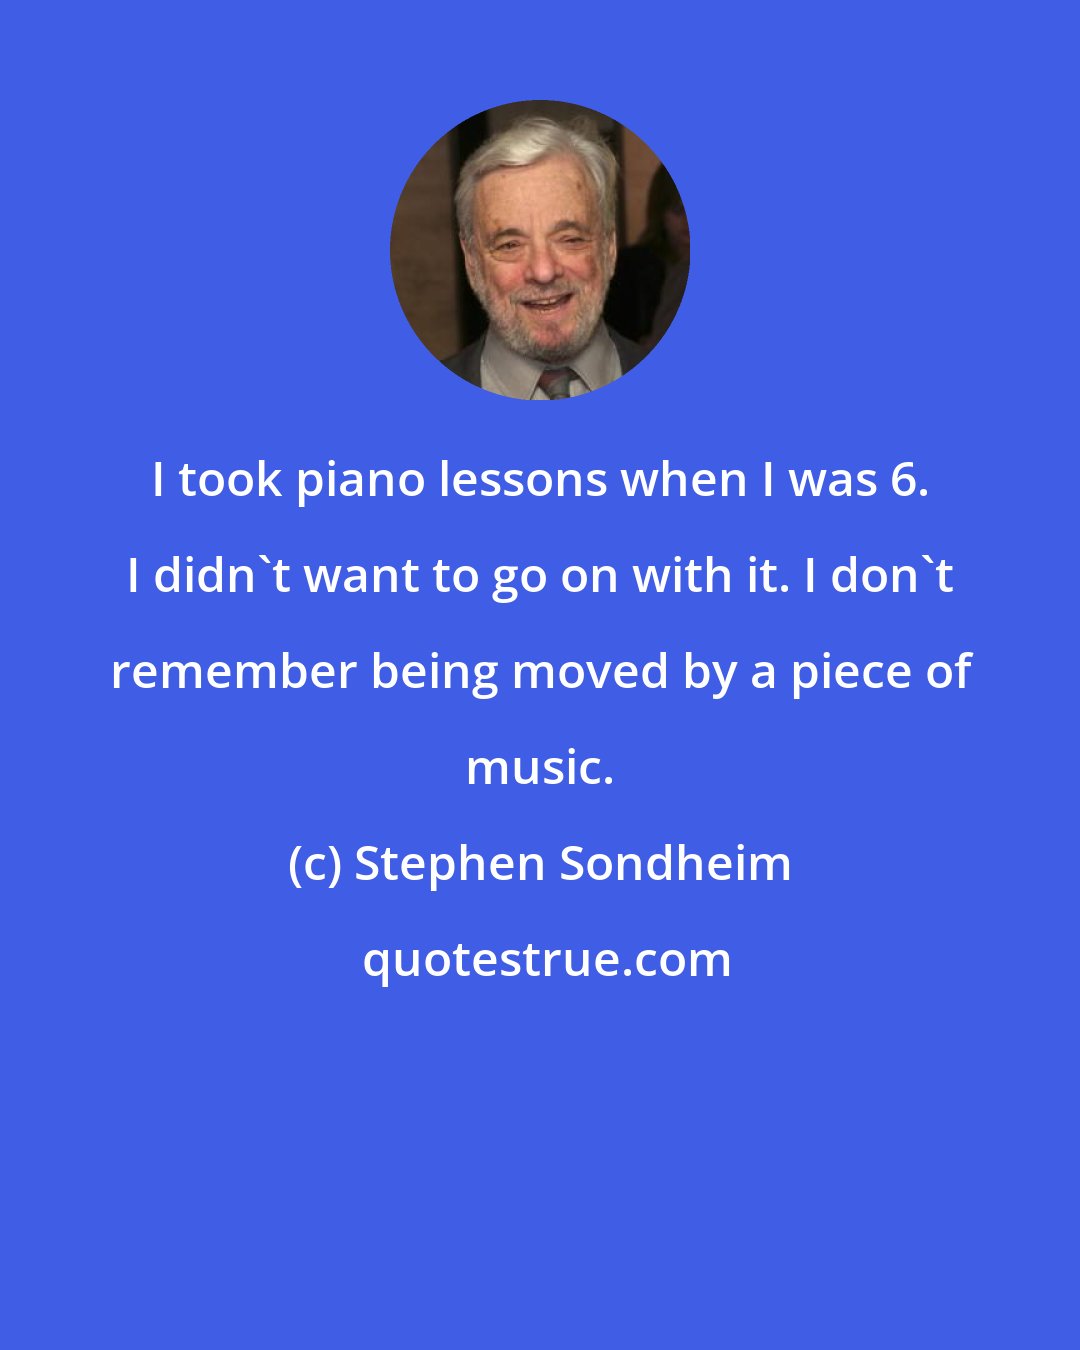 Stephen Sondheim: I took piano lessons when I was 6. I didn't want to go on with it. I don't remember being moved by a piece of music.